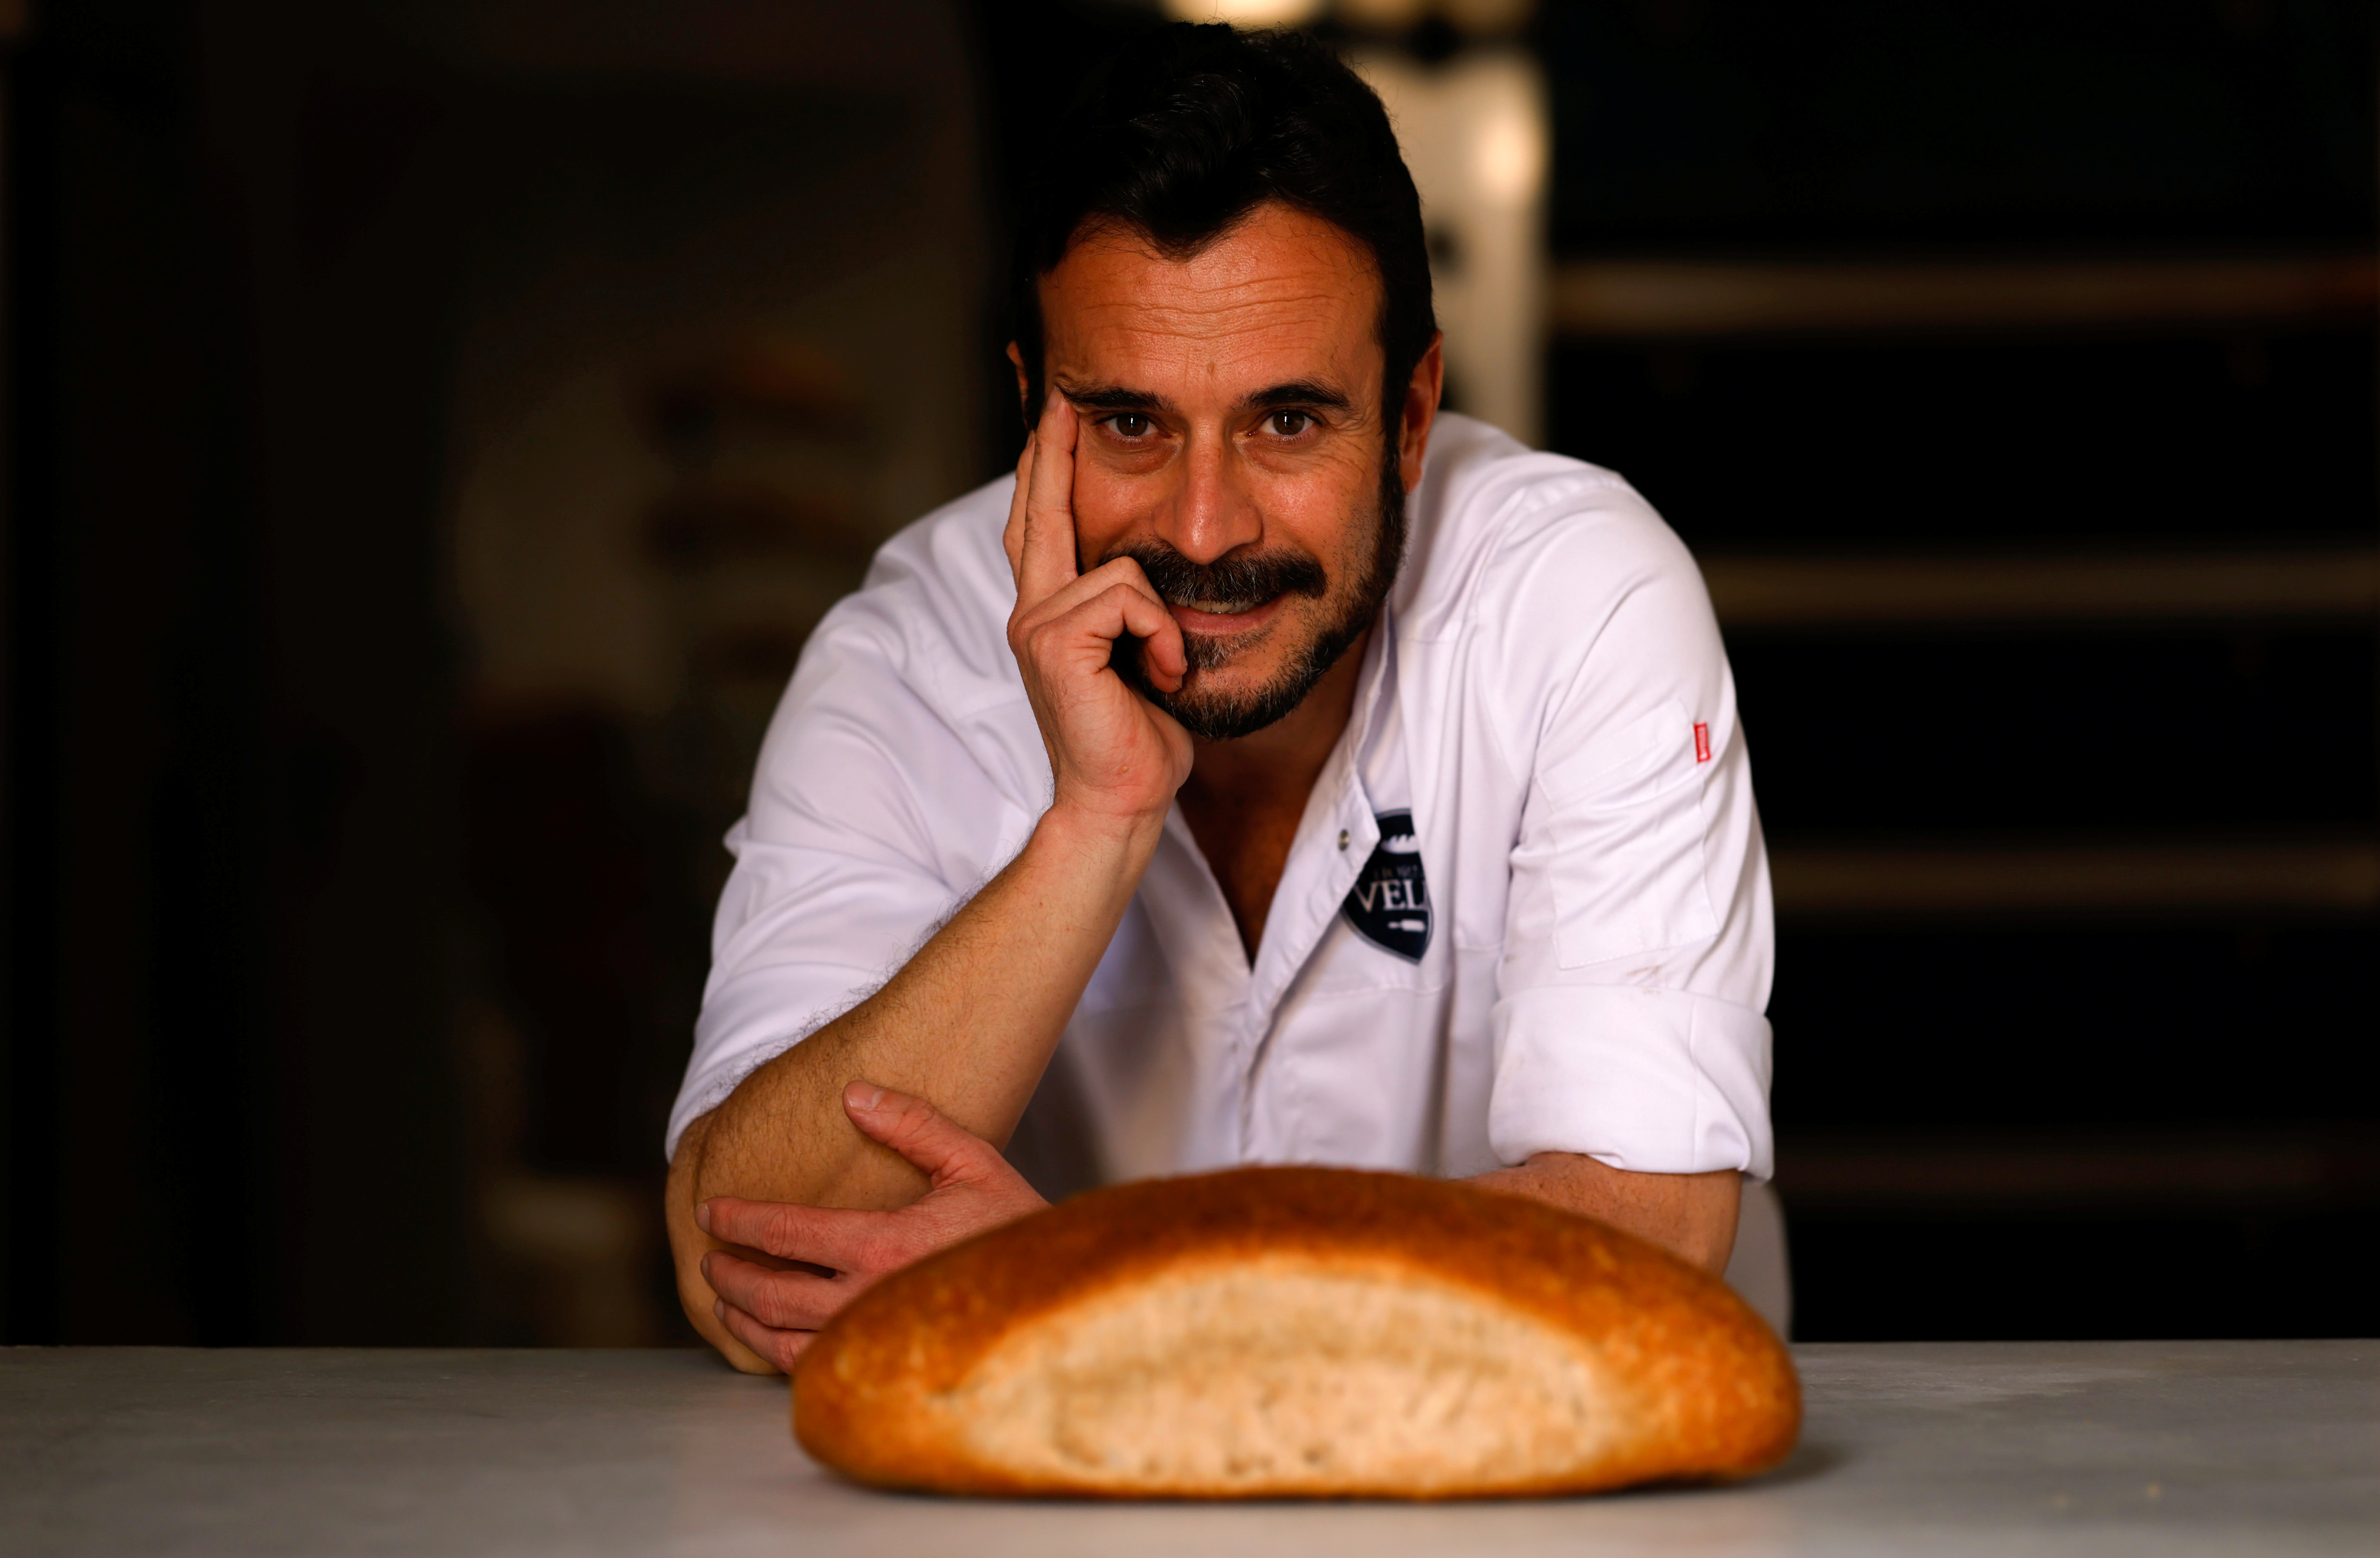 World baking champion struggles with rise of energy prices